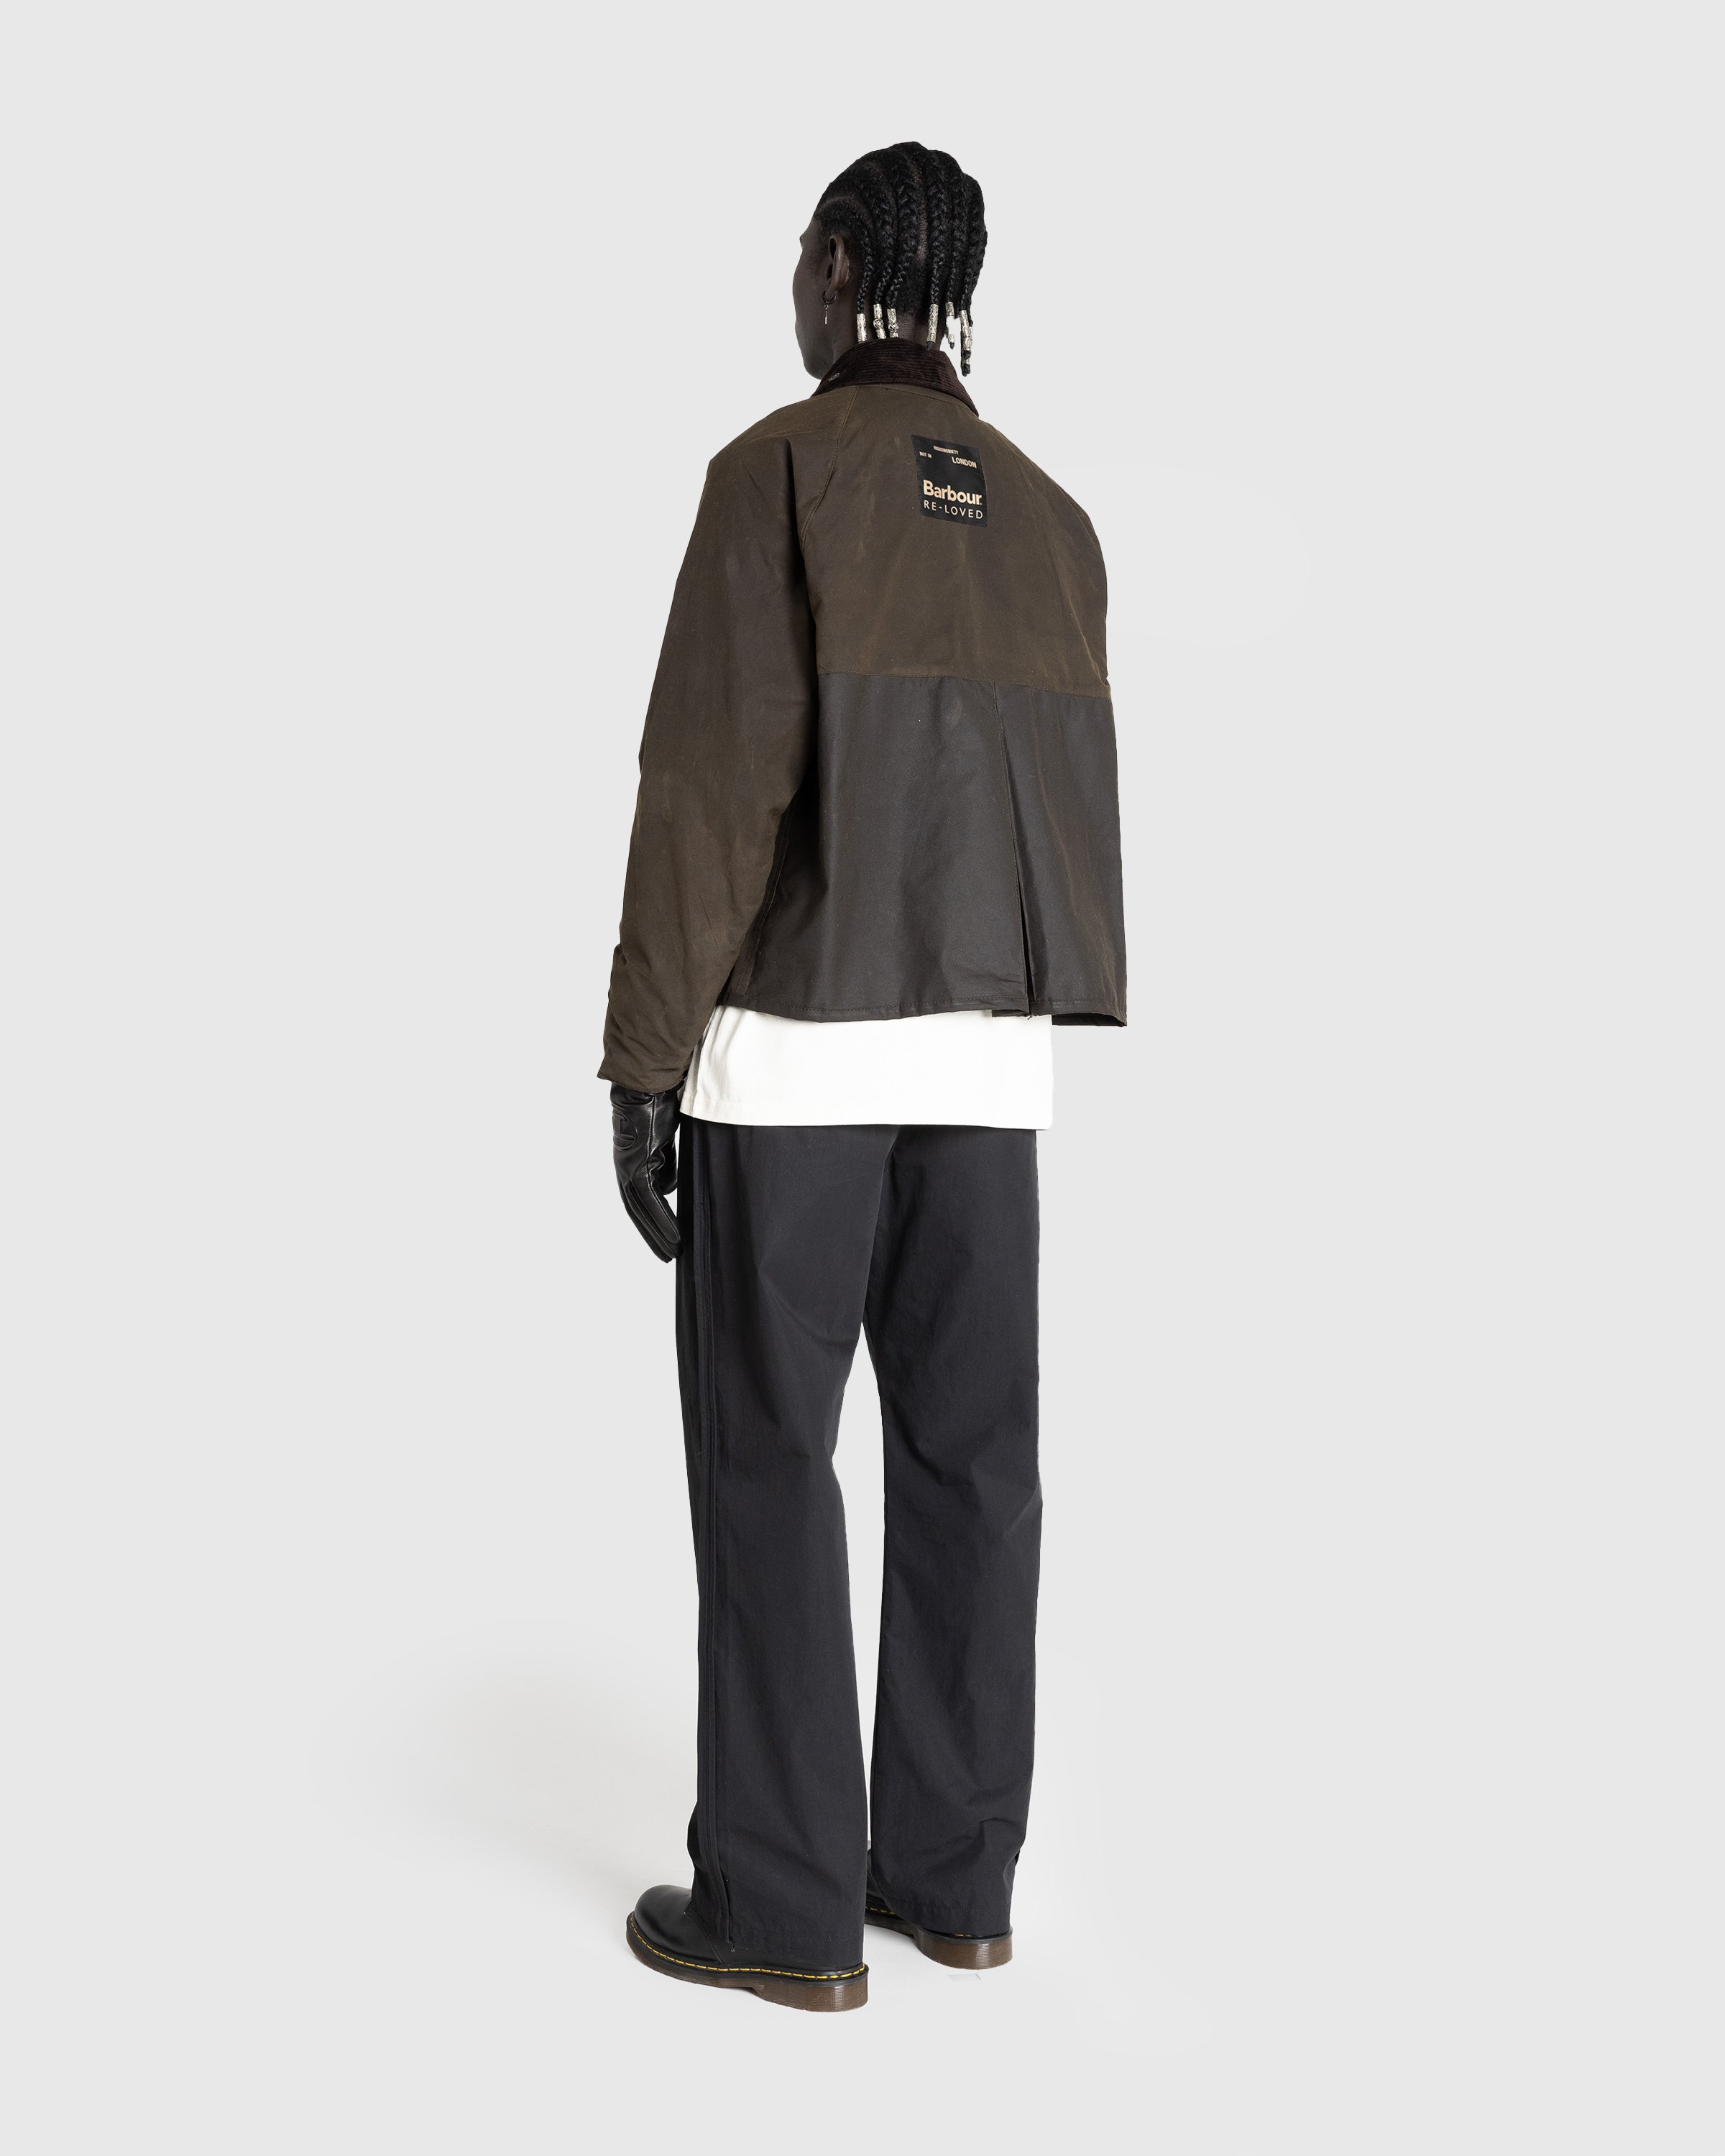 Barbour x Highsnobiety - Re-Loved Cropped Bedale Jacket 1 - 32 - Grey-Black - Clothing - Grey - Image 7